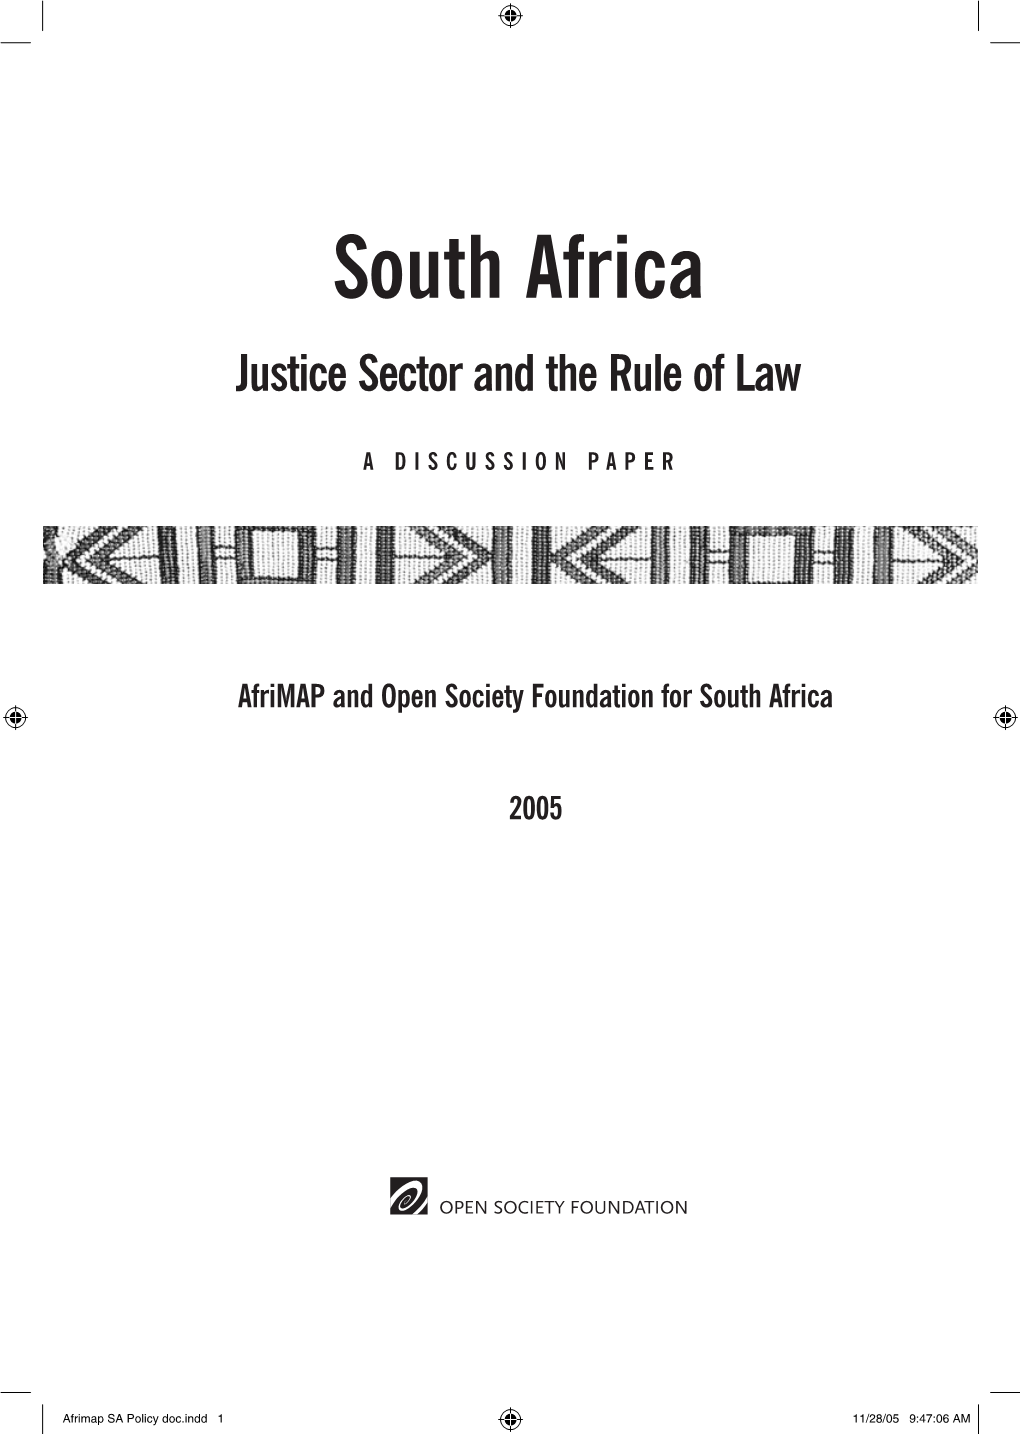 Afrimap SA Policy Doc.Indd 1 11/28/05 9:47:06 AM Copyright © 2005 by the Open Society Foundation for South Africa